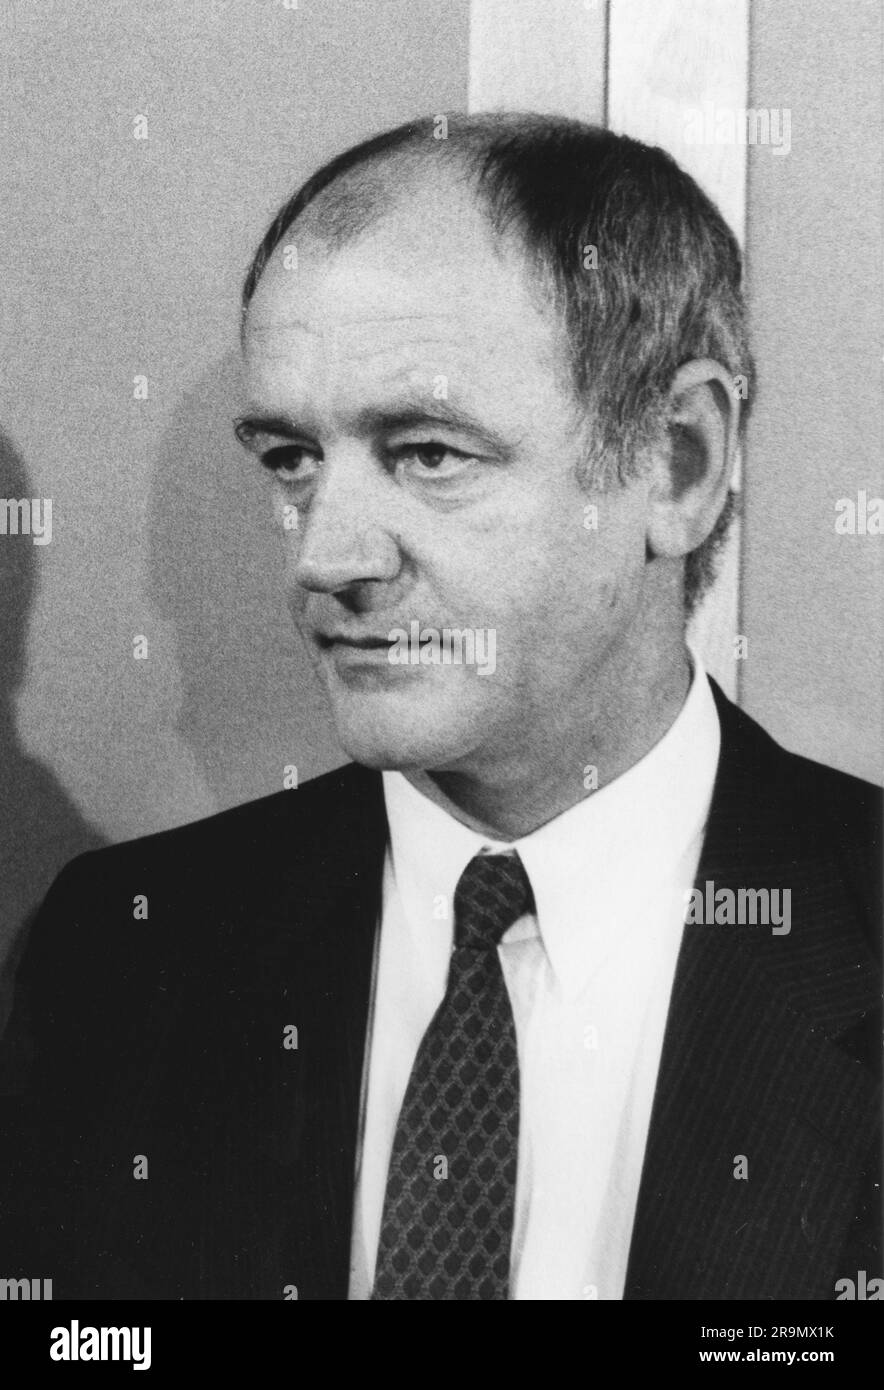 Winterstein, Horst, 5.10.1934 - 24.7.2006, German lawyer and politician (SPD), ADDITIONAL-RIGHTS-CLEARANCE-INFO-NOT-AVAILABLE Stock Photo